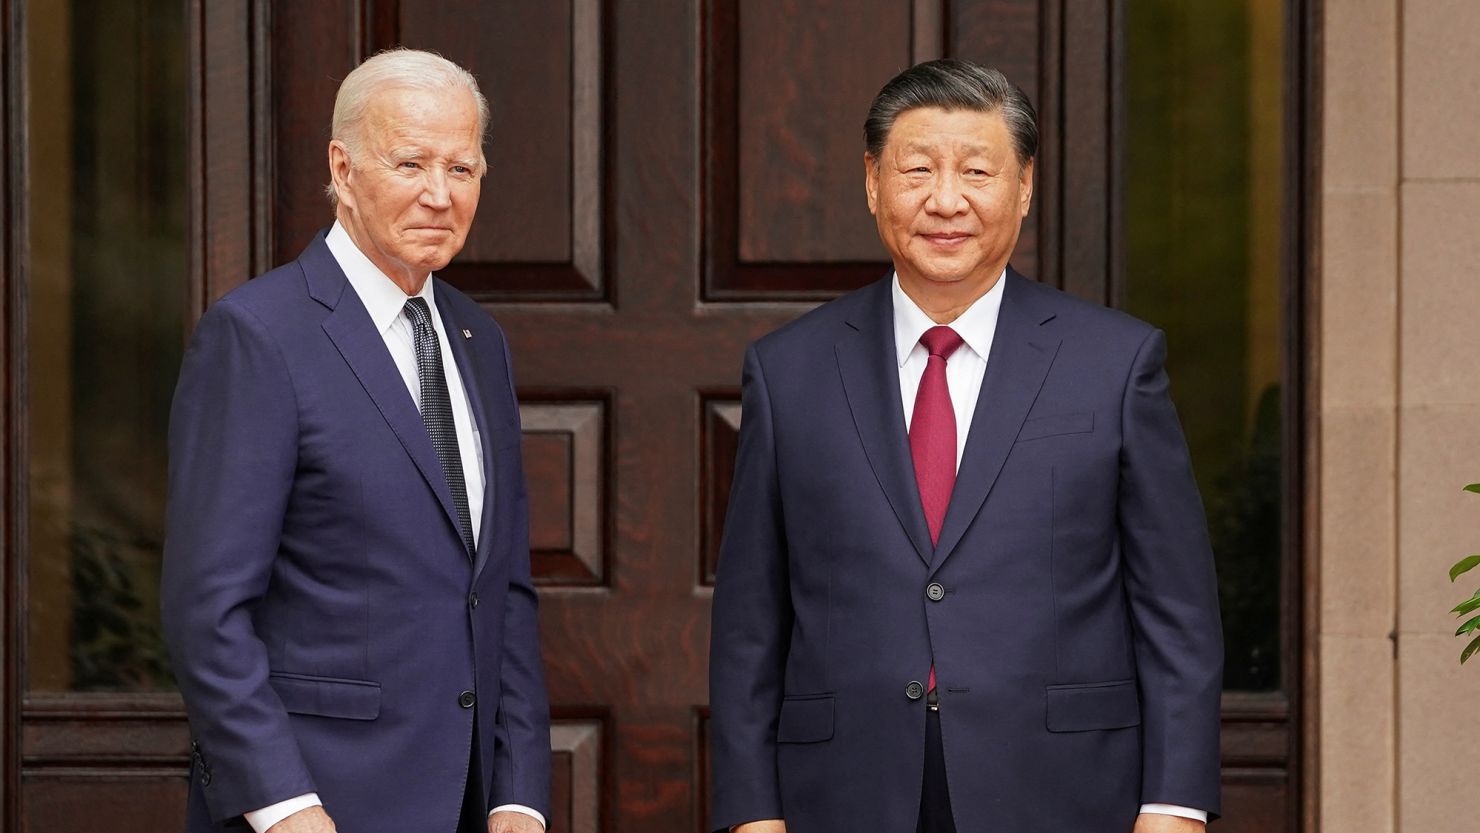 President Joe Biden meets with Chinese leader Xi Jinping on the sidelines of the Asia-Pacific Economic Cooperation (APEC) summit, in Woodside, California, November 15, 2023.